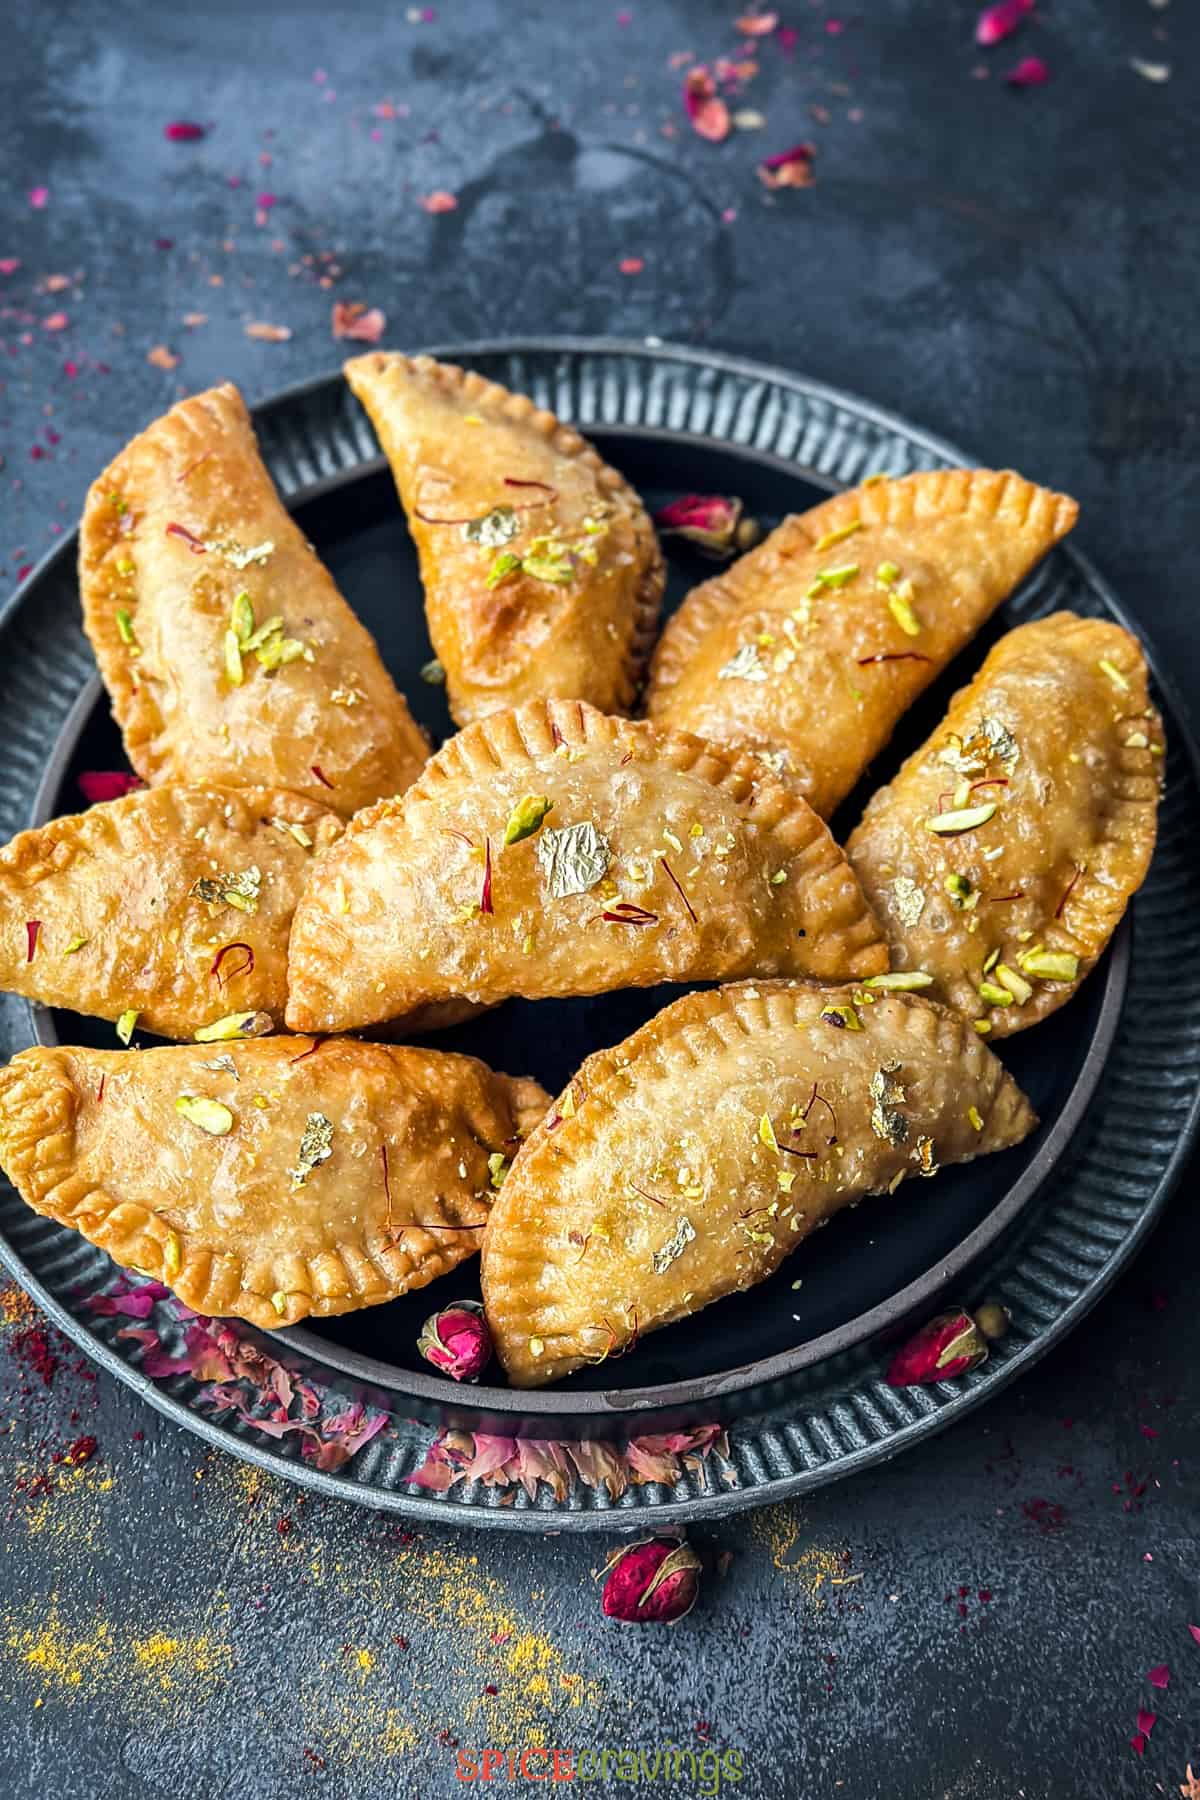 Gujiya garnished with pistachio, saffron and gold foil placed on metal trays